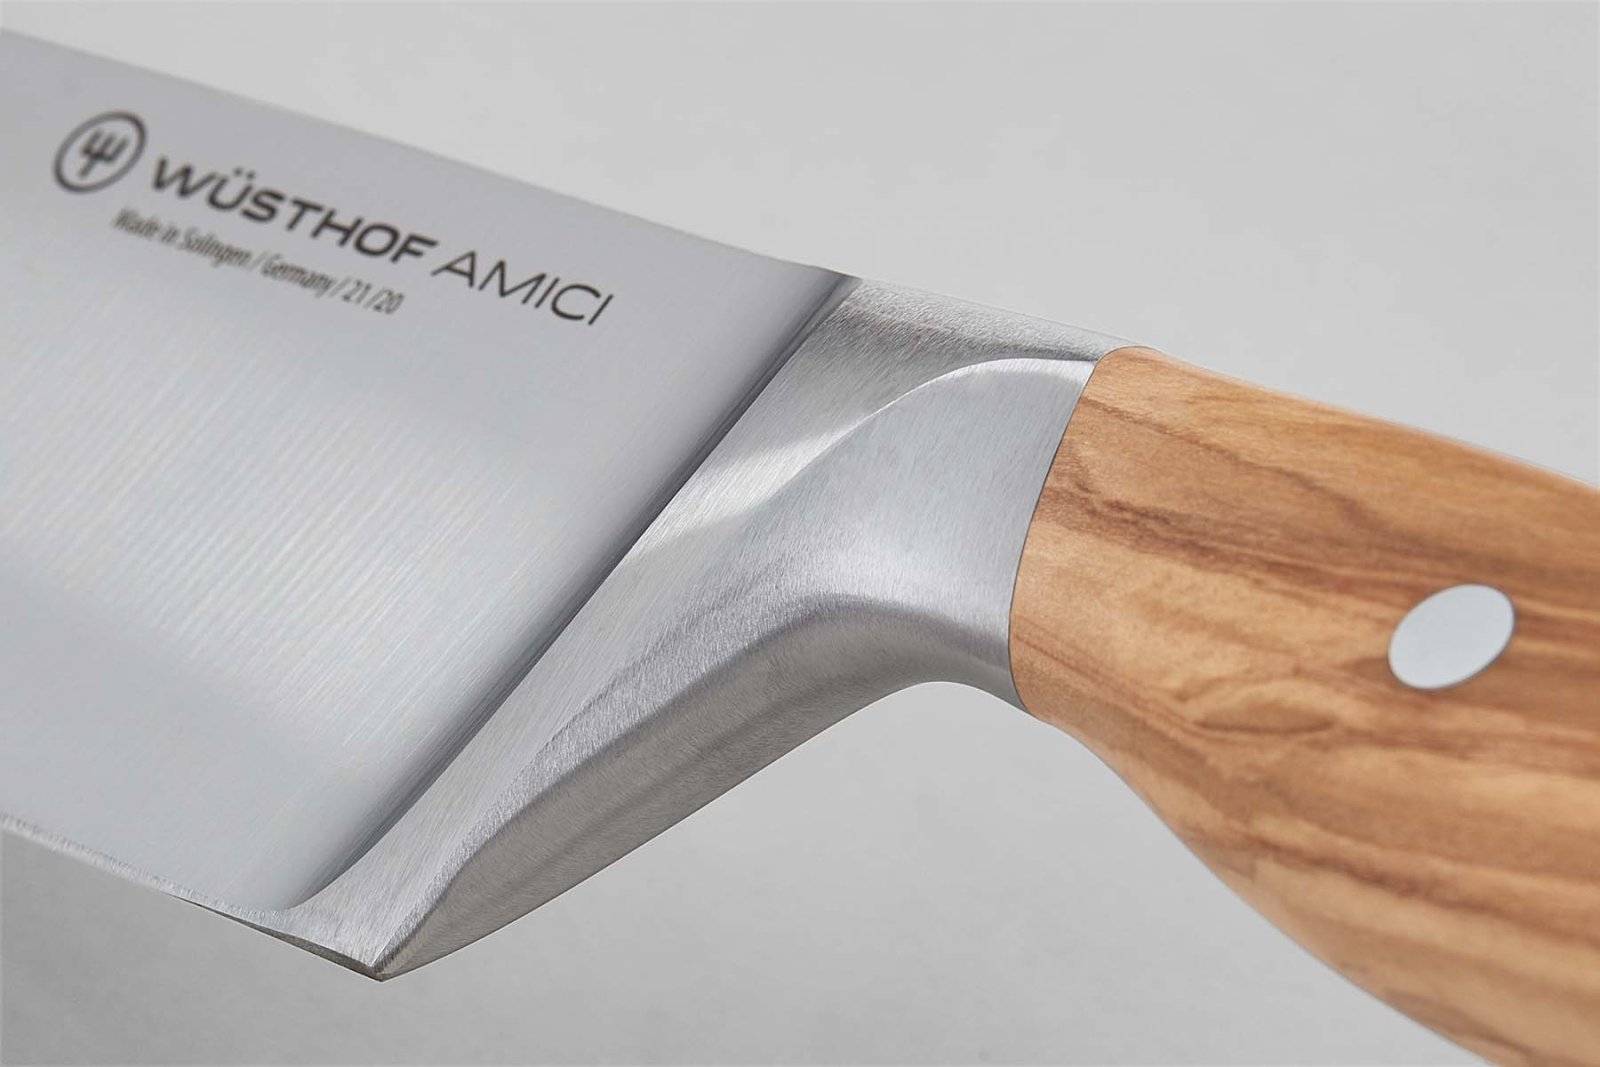 Wusthof Amici 20cm Cook's Knife - WT1011300120 - The Cotswold Knife Company